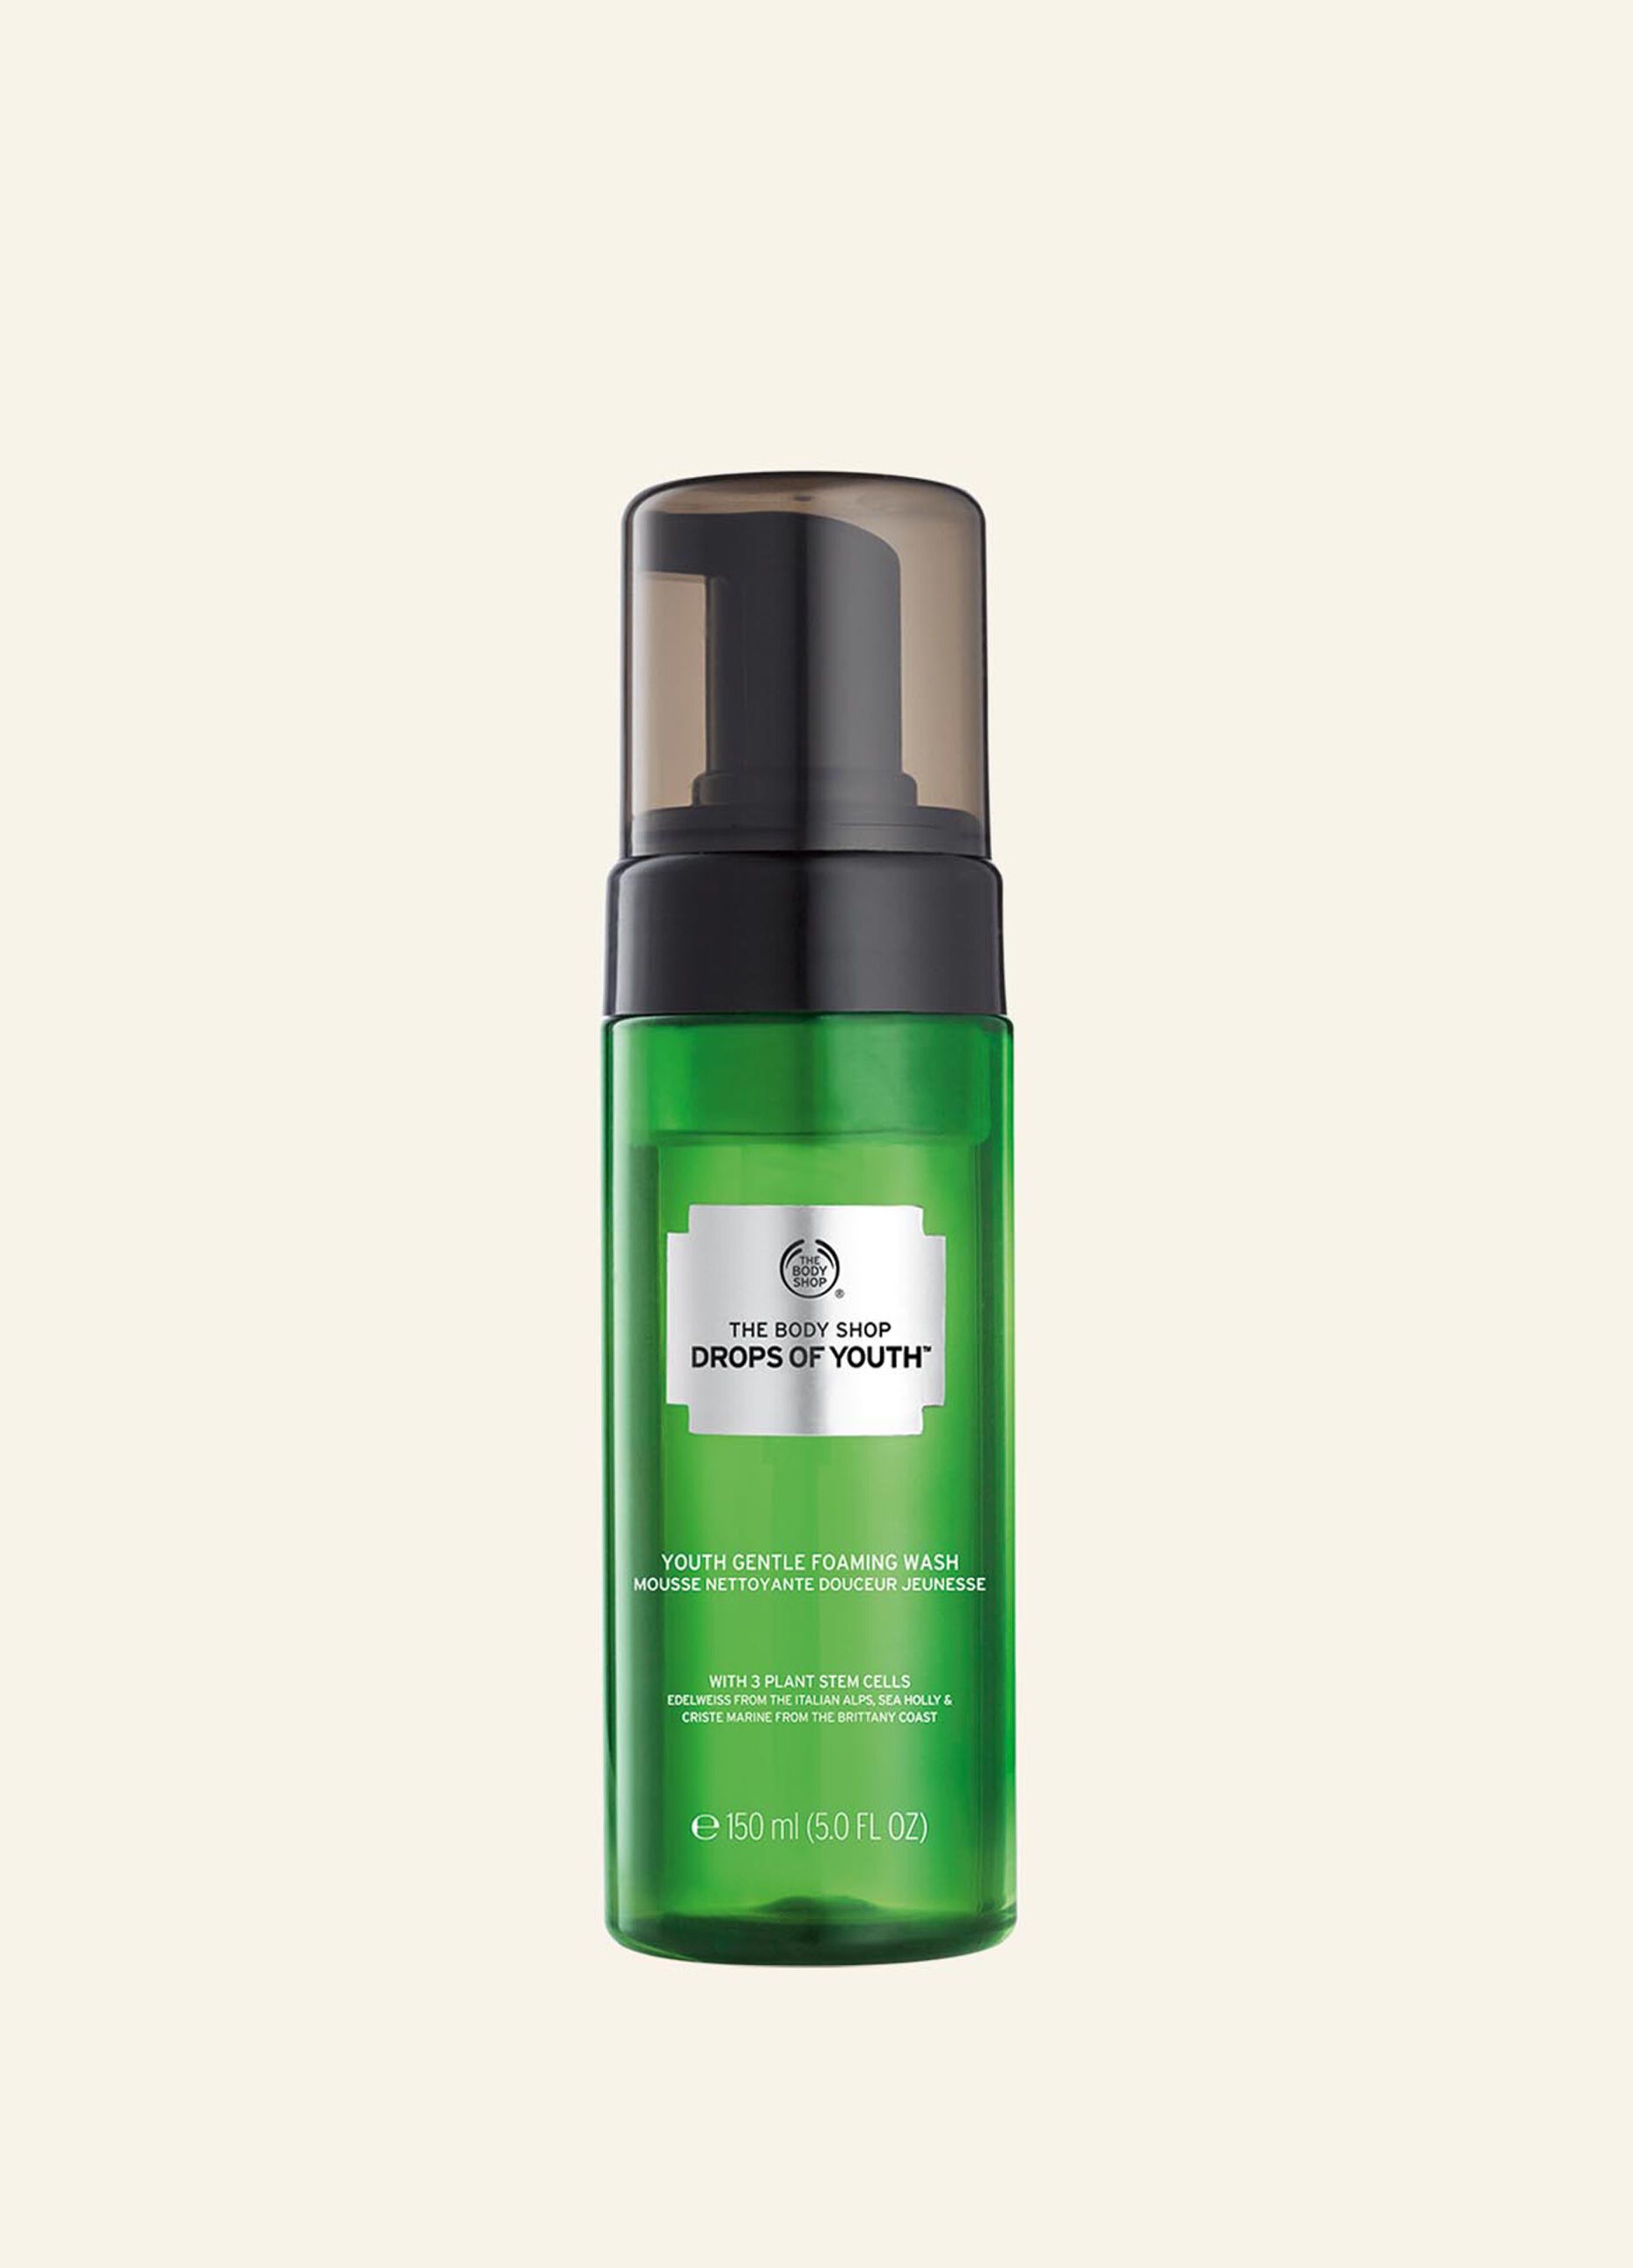 The Body Shop Drops Of Youth™ facial cleansing foam 150ml